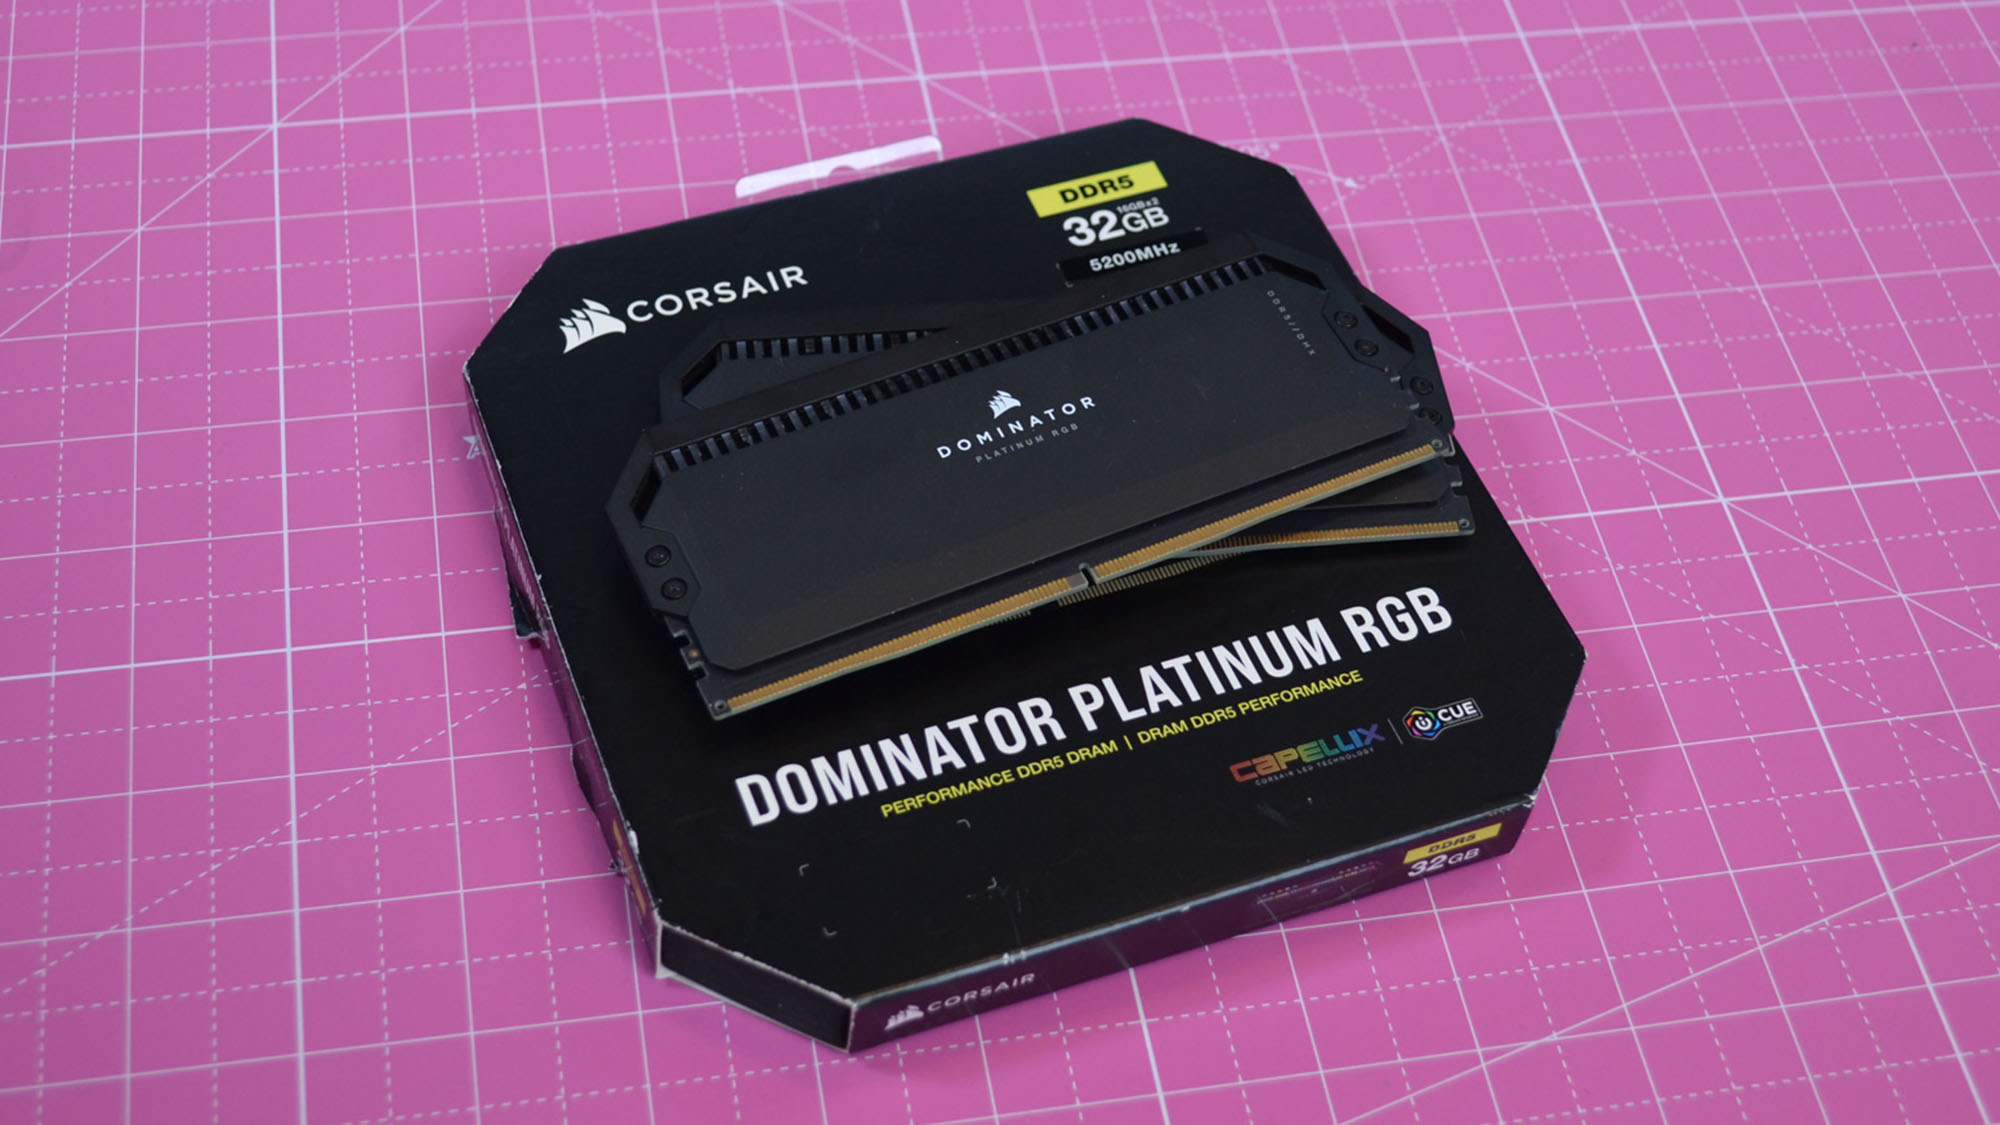 Corsair Dominator Platinum RGB DDR5 RAM with its retail packaging